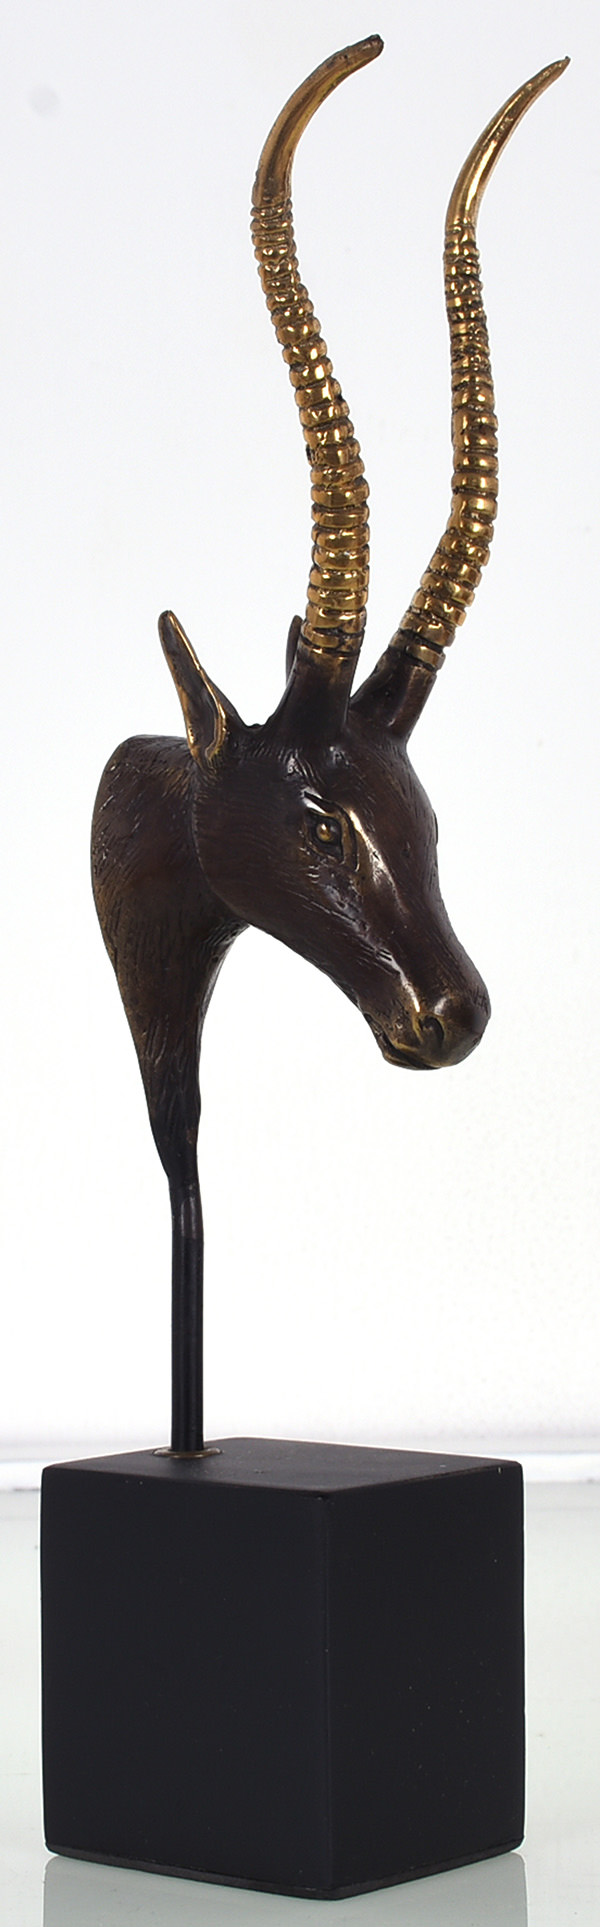 impala head bronze sculpture with standing base